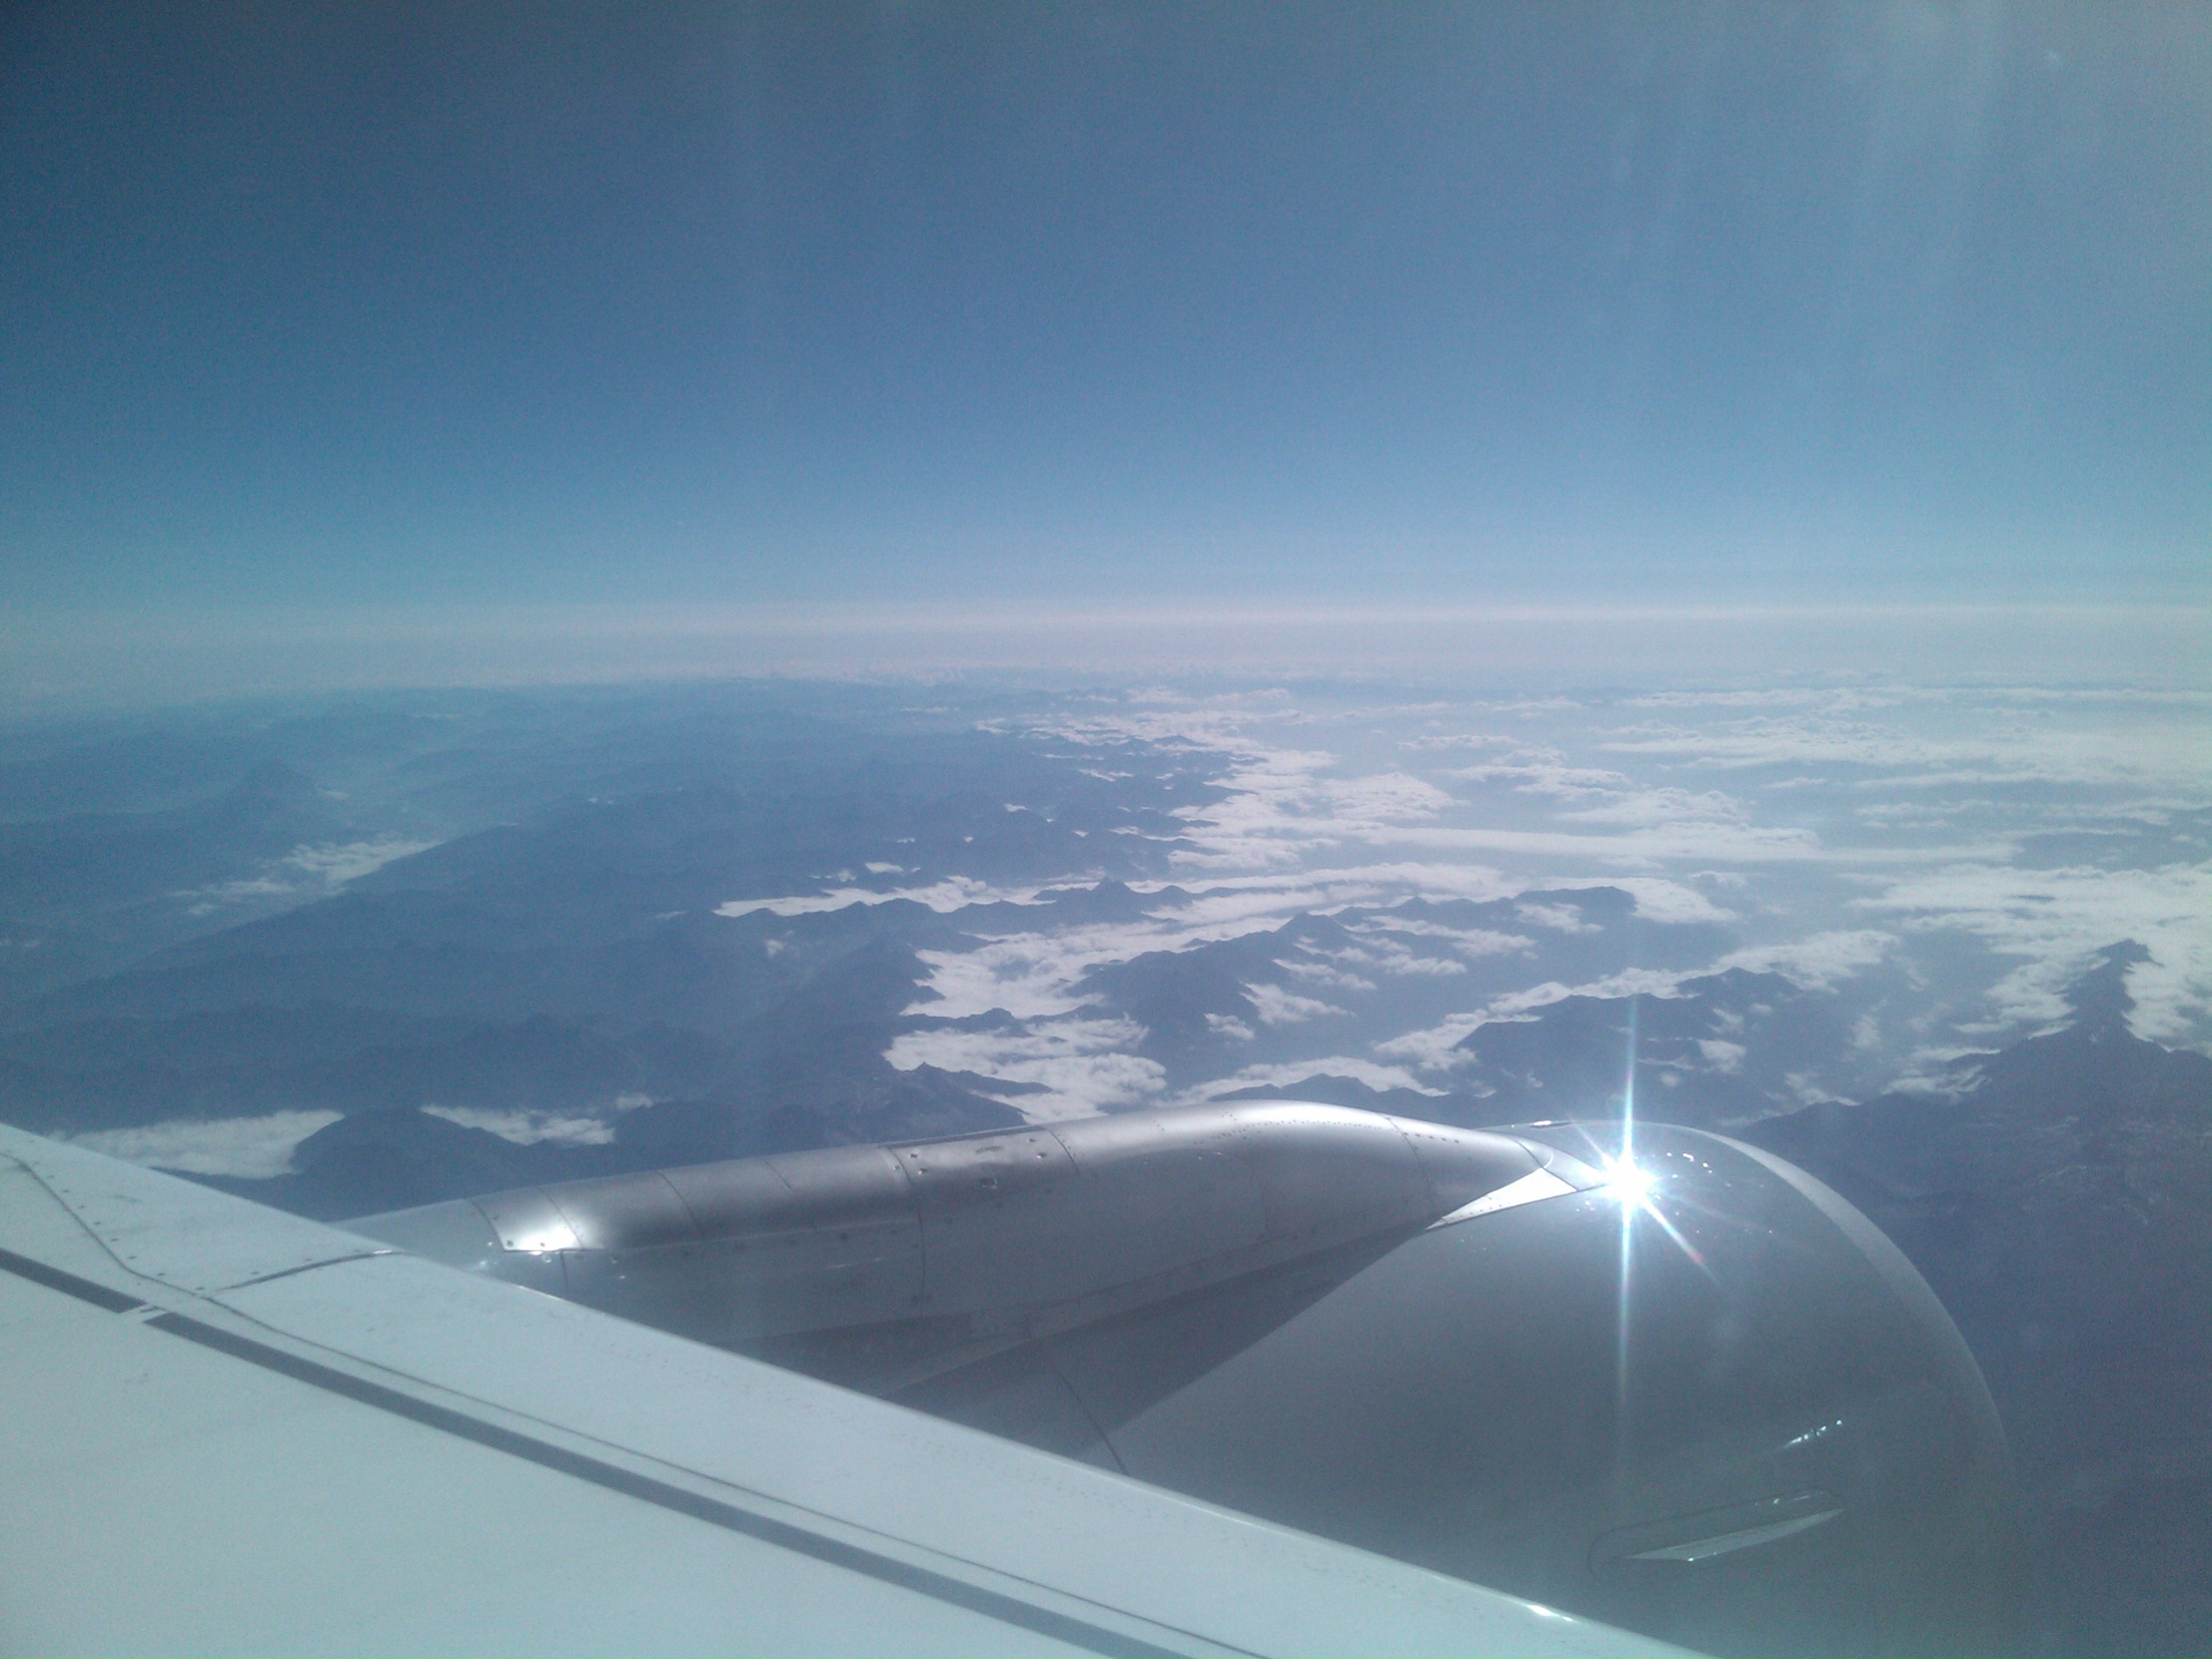 From Germany to Athens - above Alps